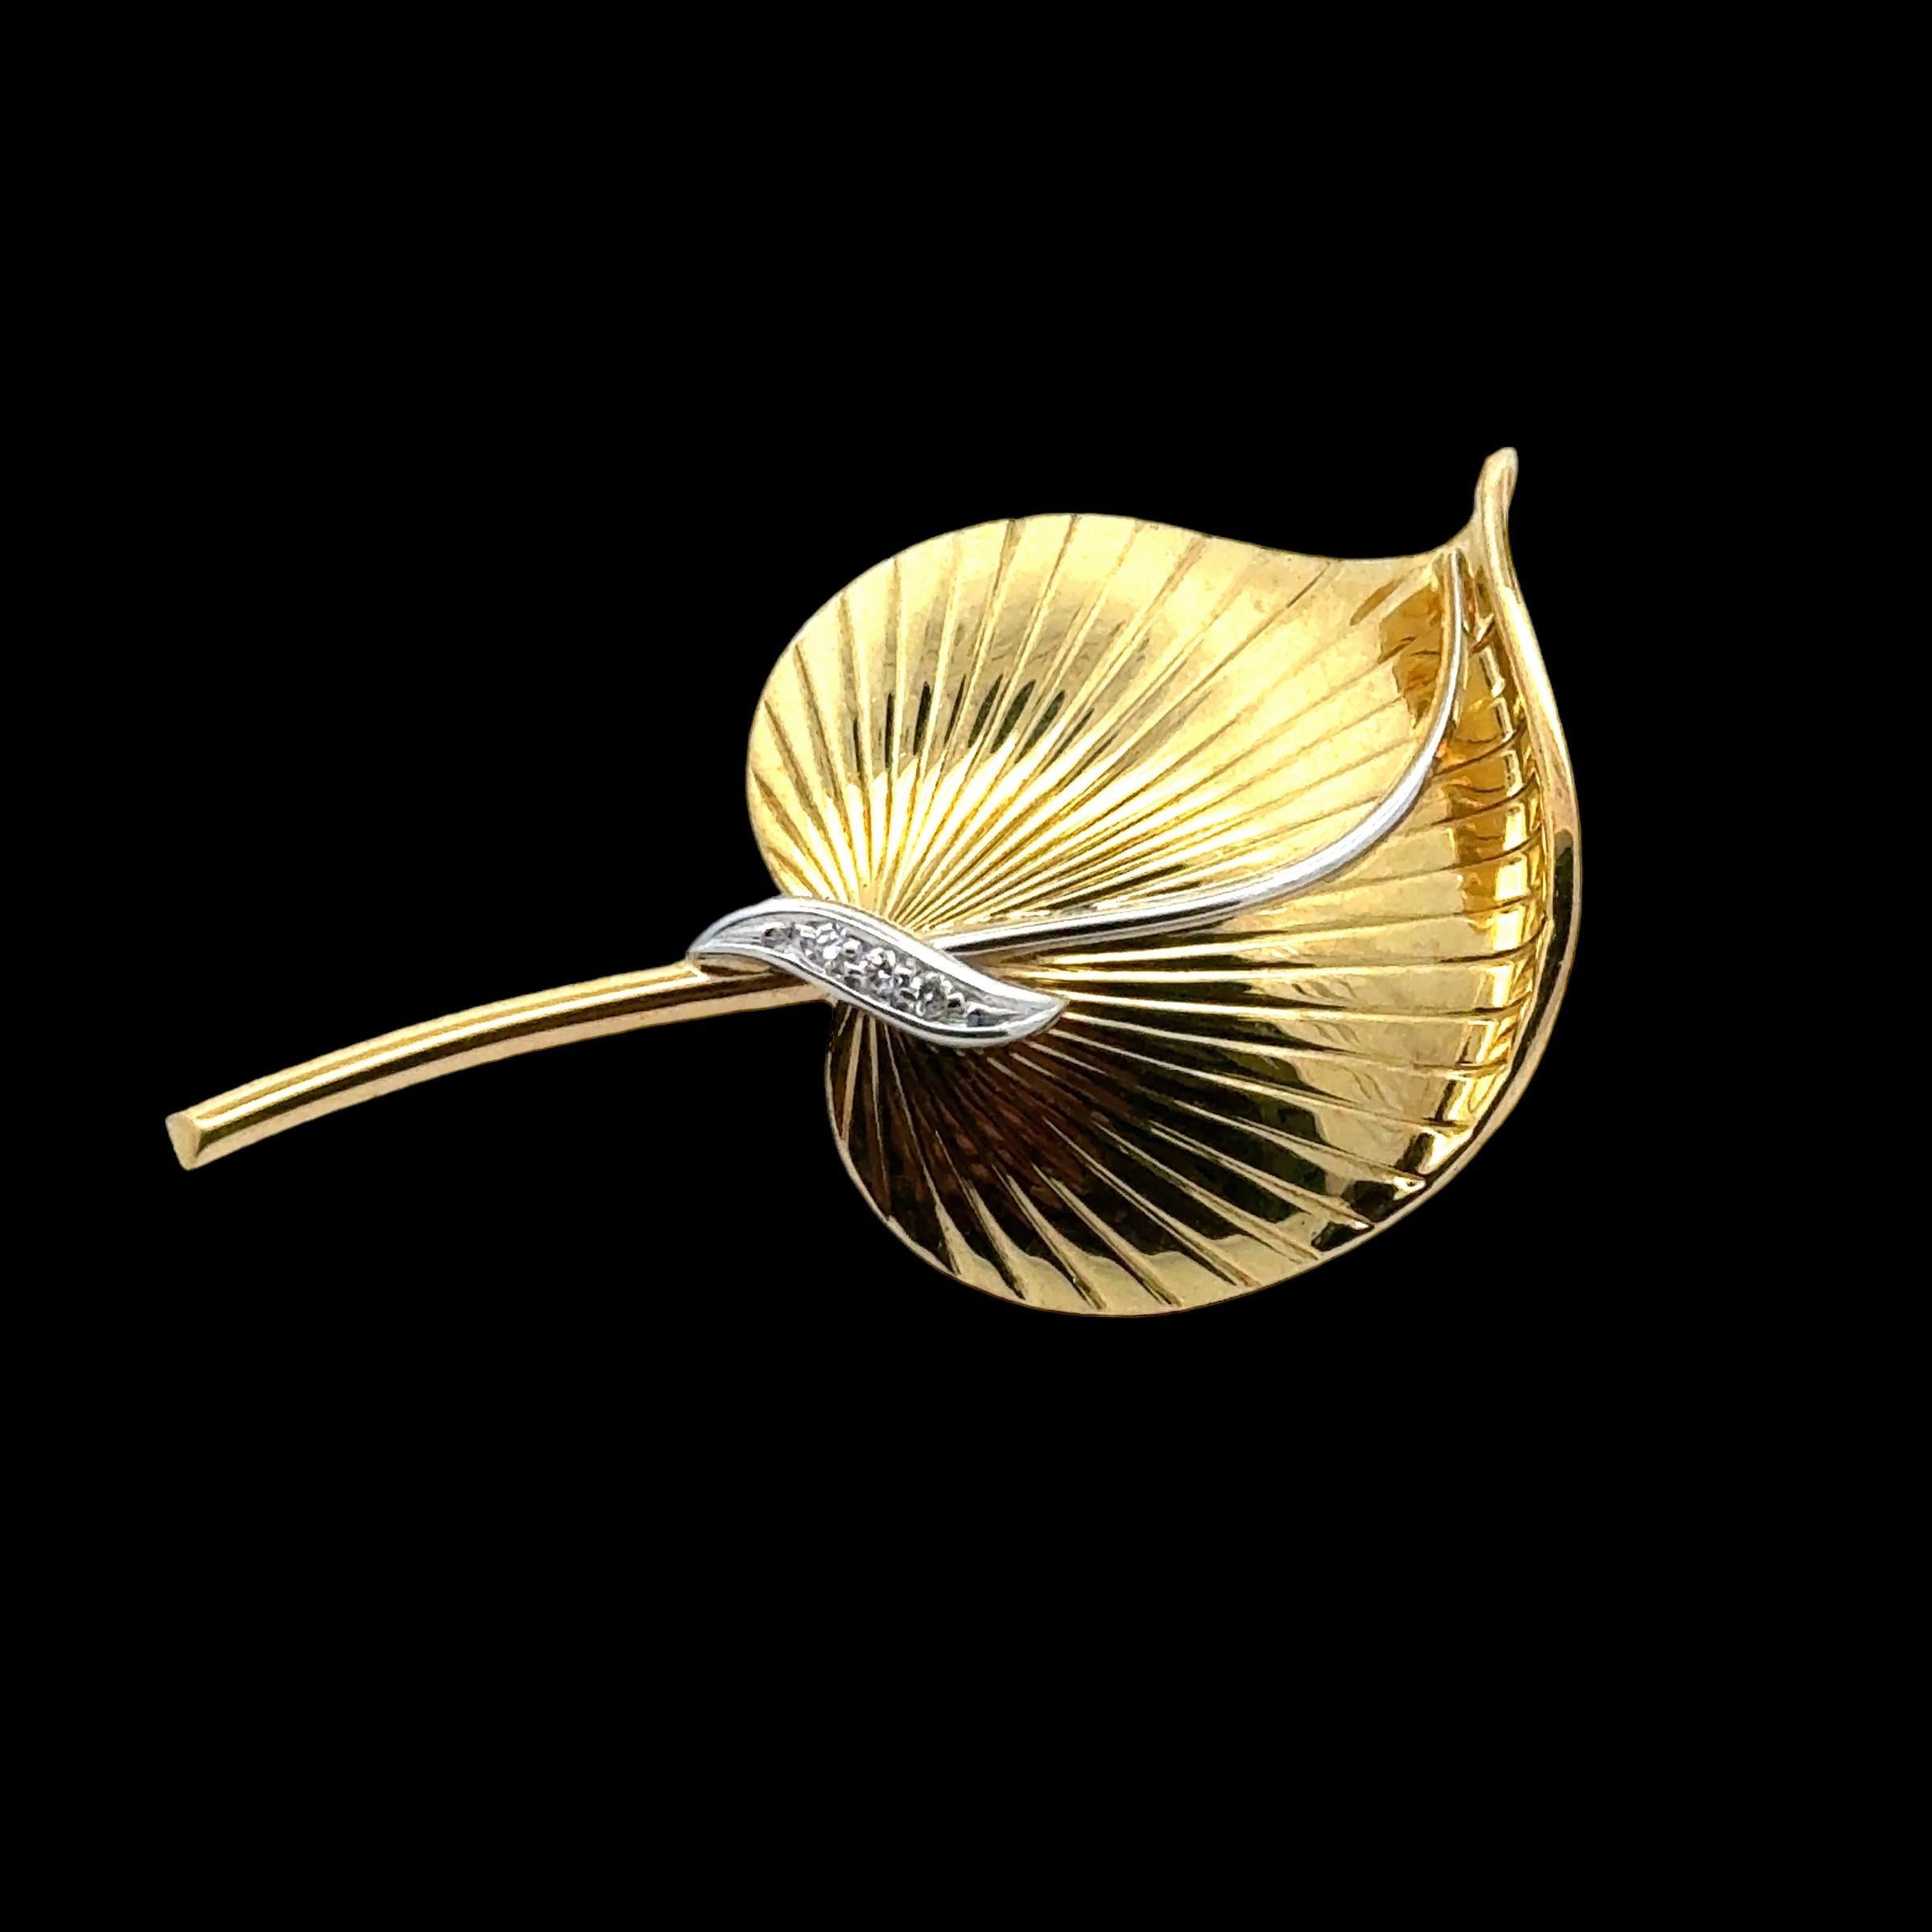 Diamond 18 Karat Yellow Gold Vintage Leaf Brooch Pin In Excellent Condition For Sale In Boca Raton, FL